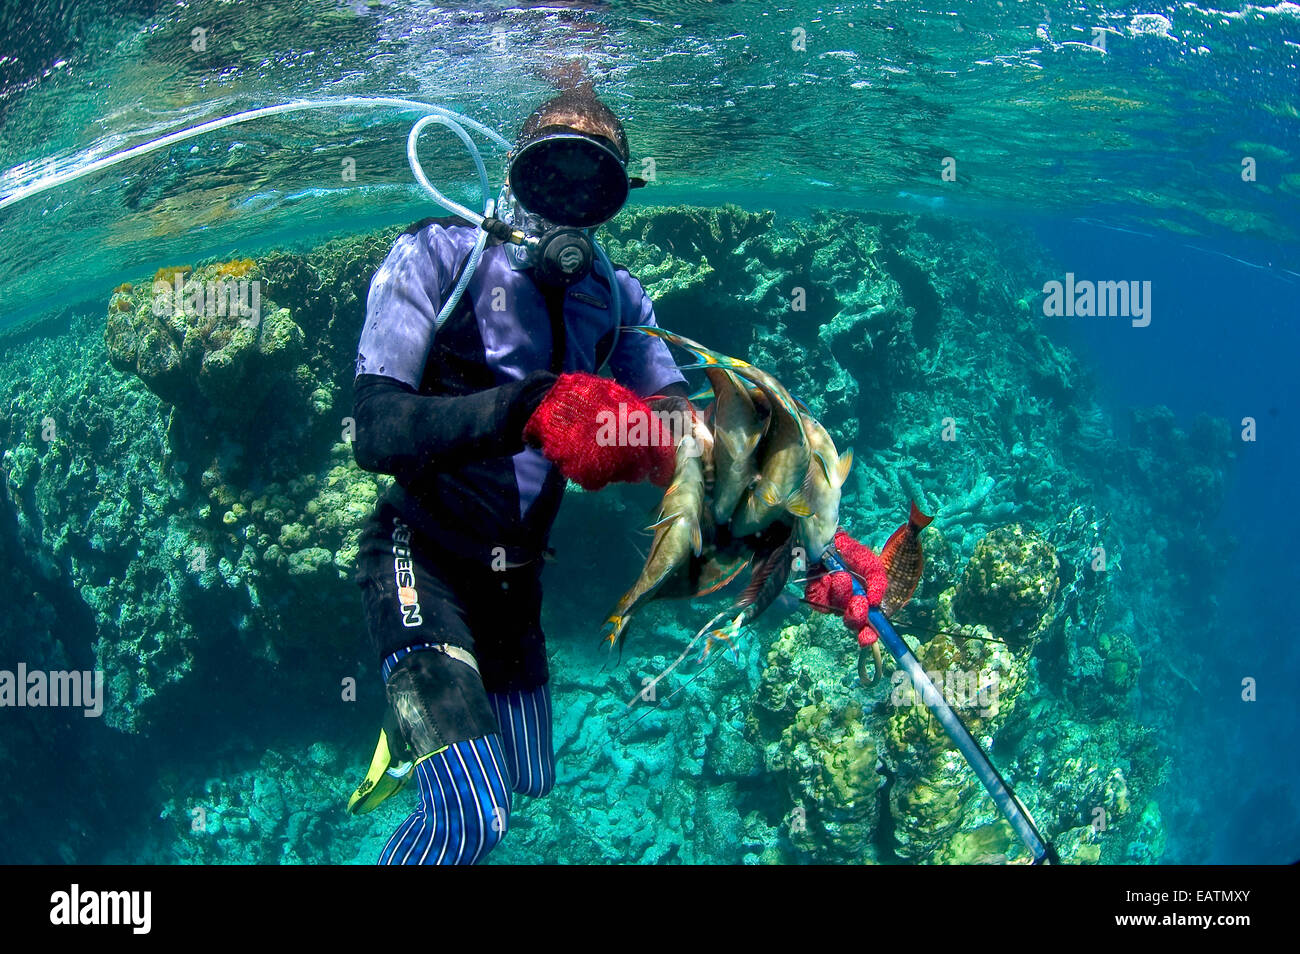 Dominican fisherman fishing in the Silver Bank Sanctuary. Stock Photo